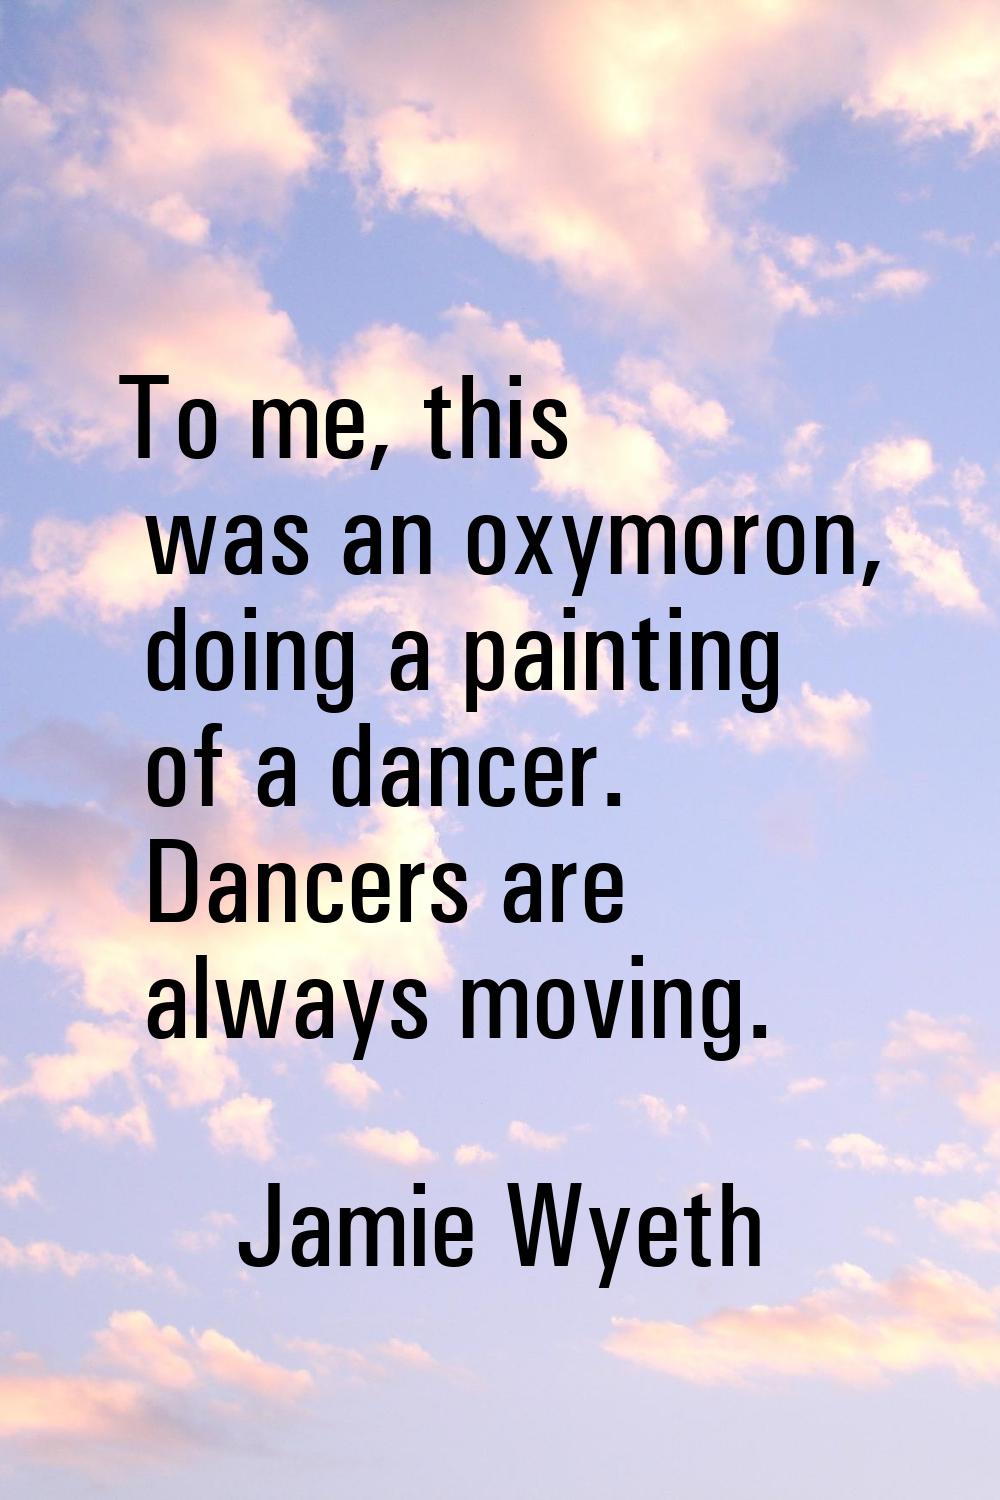 To me, this was an oxymoron, doing a painting of a dancer. Dancers are always moving.